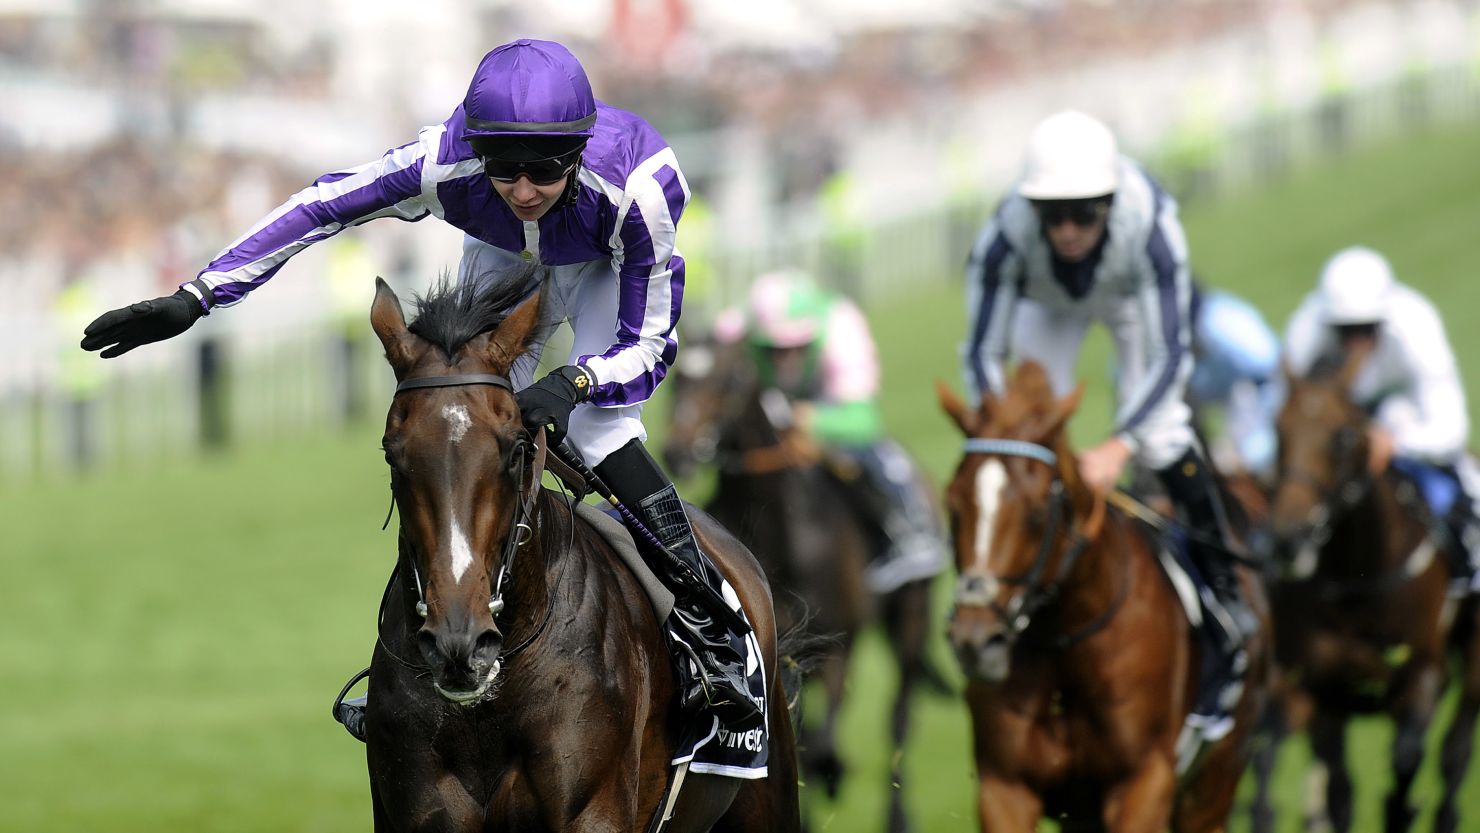 Teenage jockey Joseph O'Brien rode his father's horse Camelot to victory at Epsom Racecourse on Saturday.